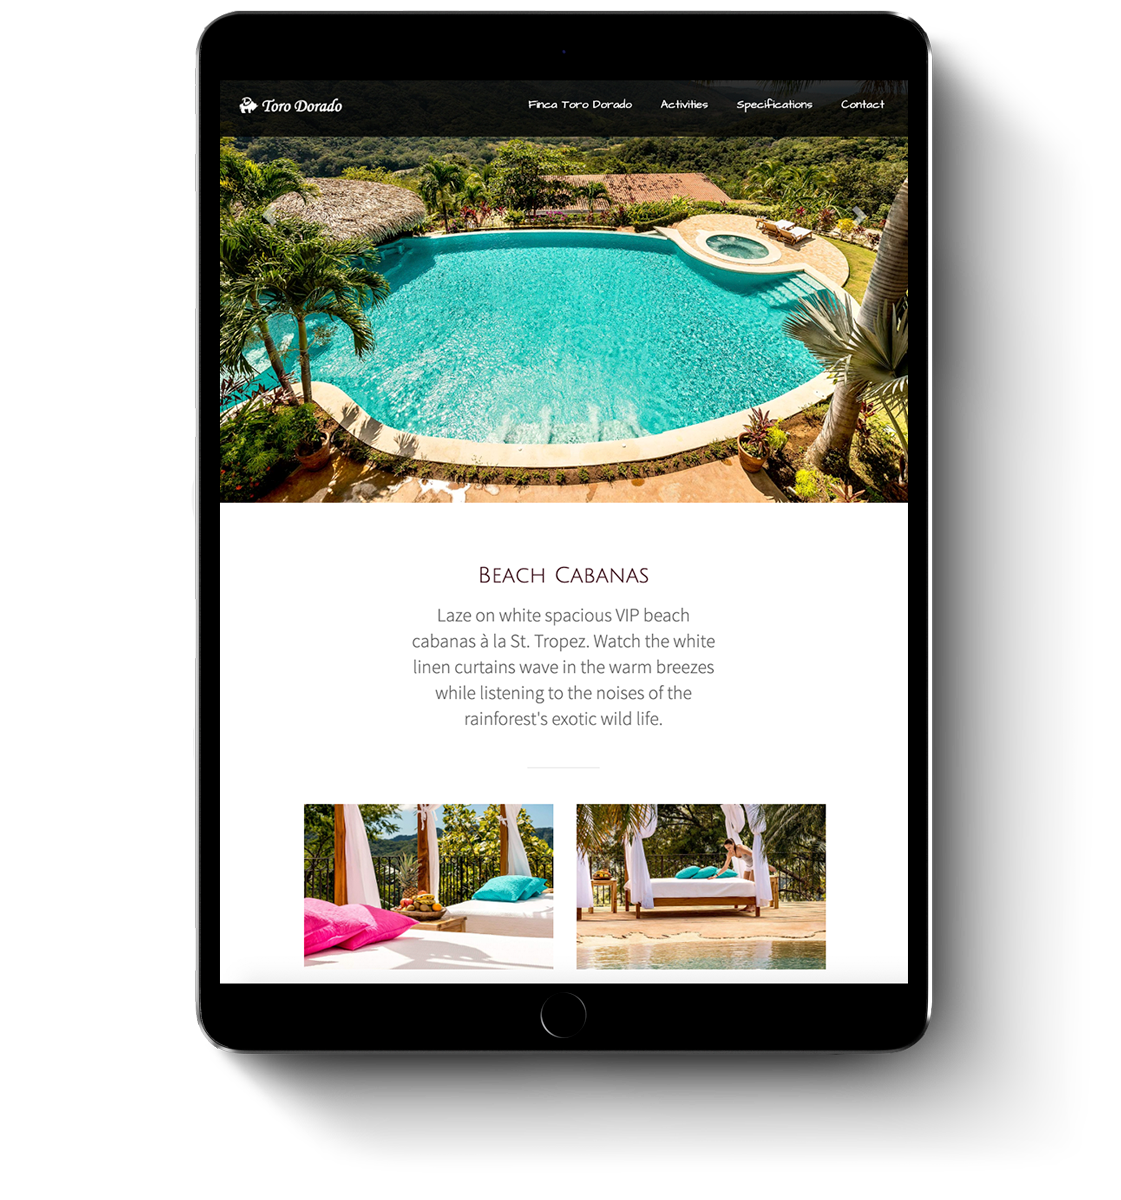 Toro dorado luxury property web design for mobile devices and tablets